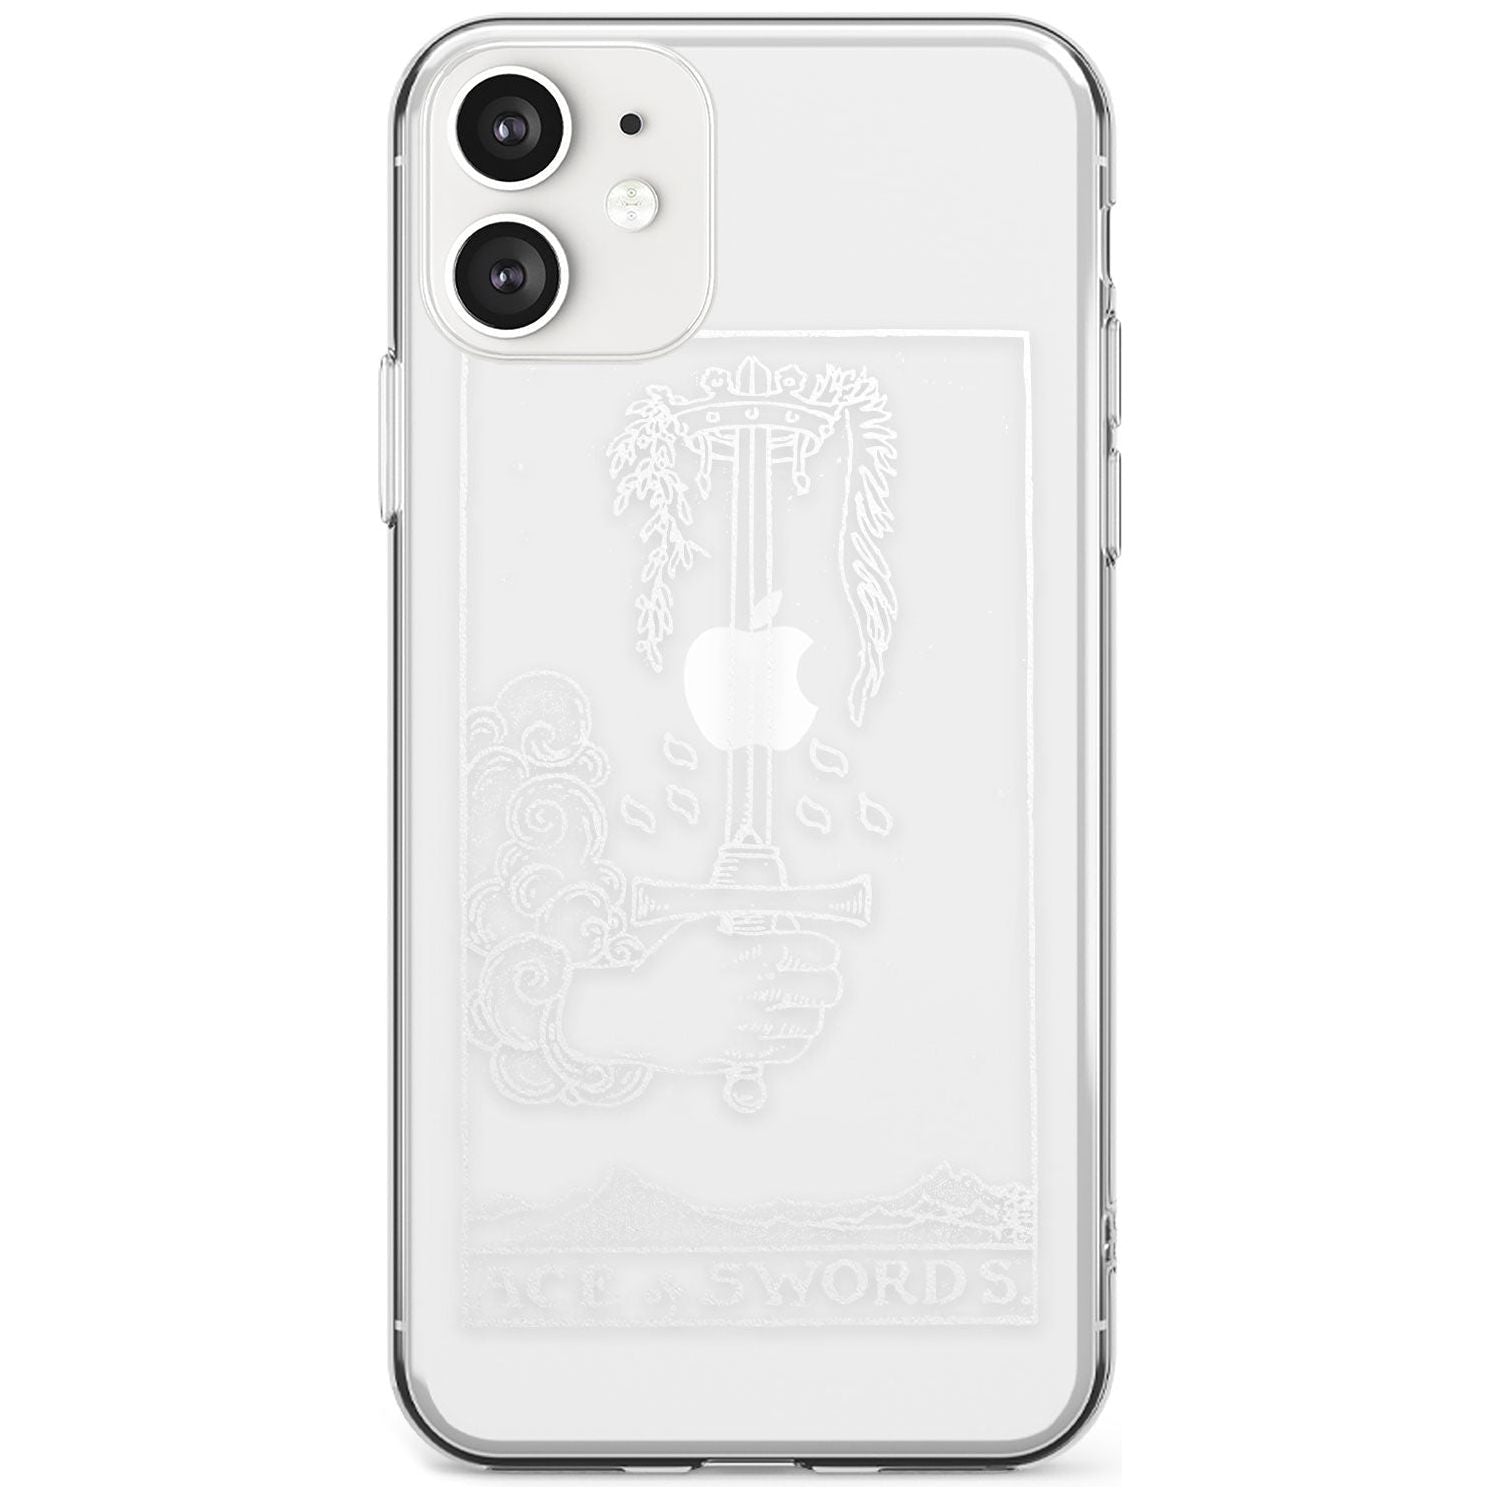 Ace of Swords Tarot Card - White Transparent Black Impact Phone Case for iPhone 11